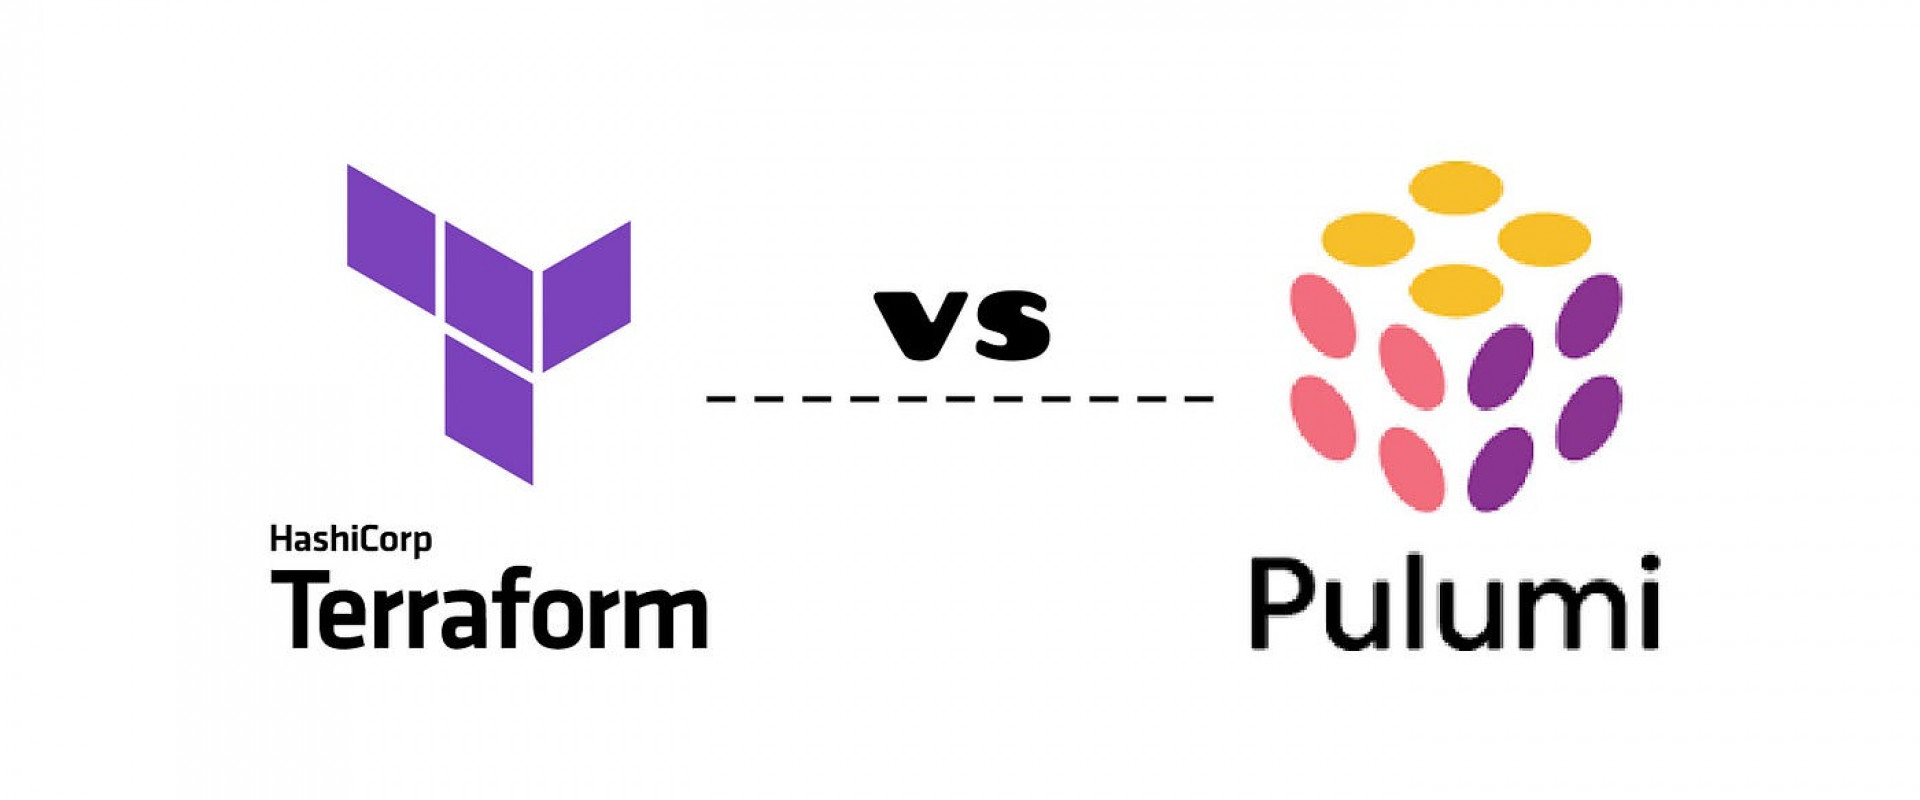 Pulumi: The Real Infrastructure as Code